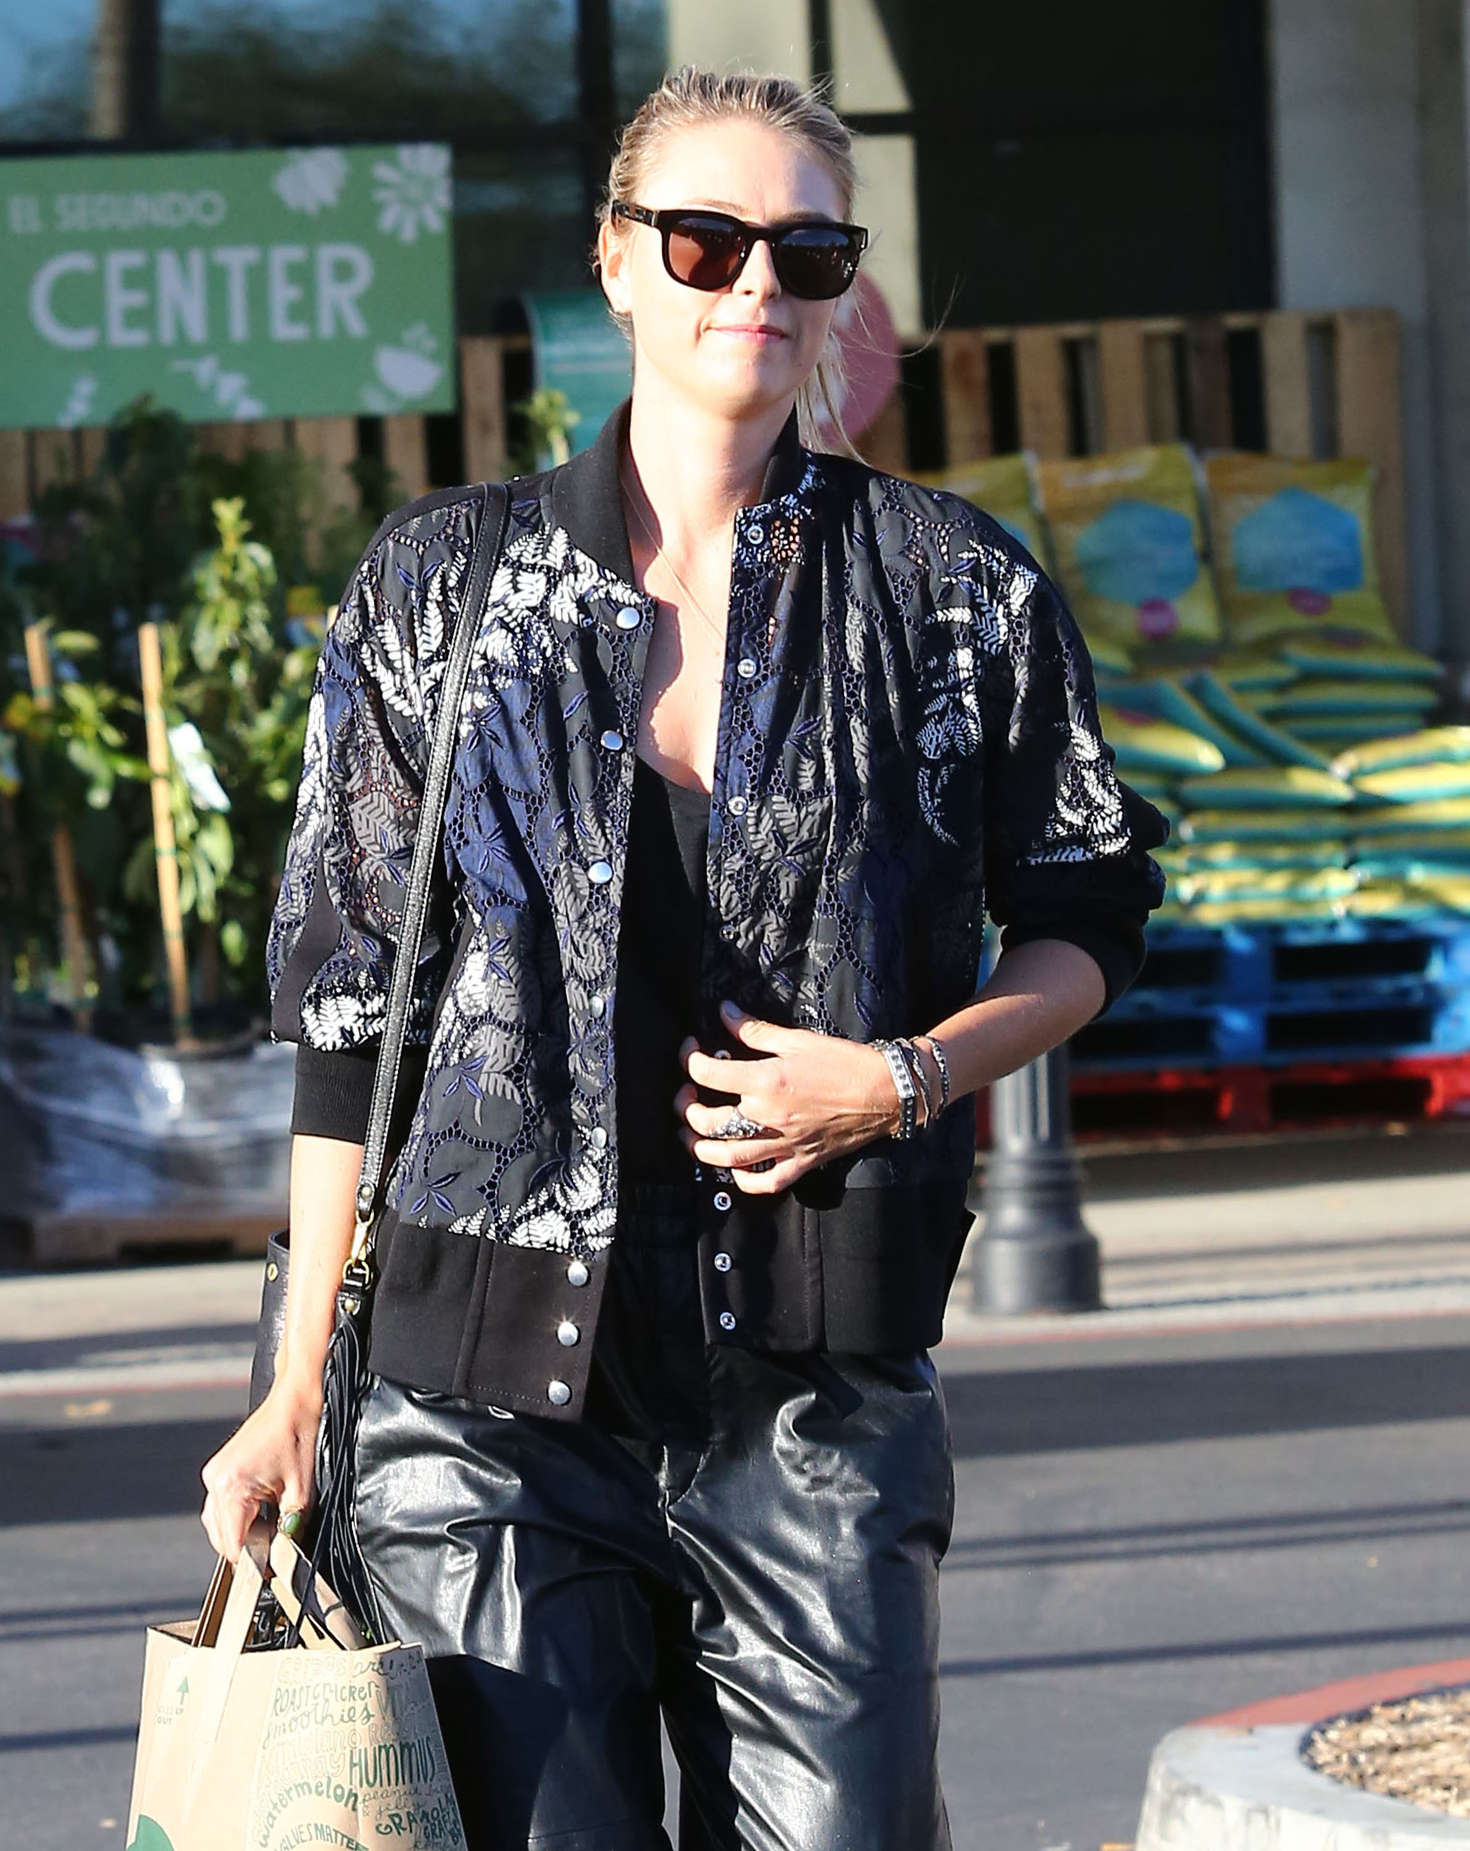 Maria Sharapova â€“ Shopping at Whole Foods in Los Angeles